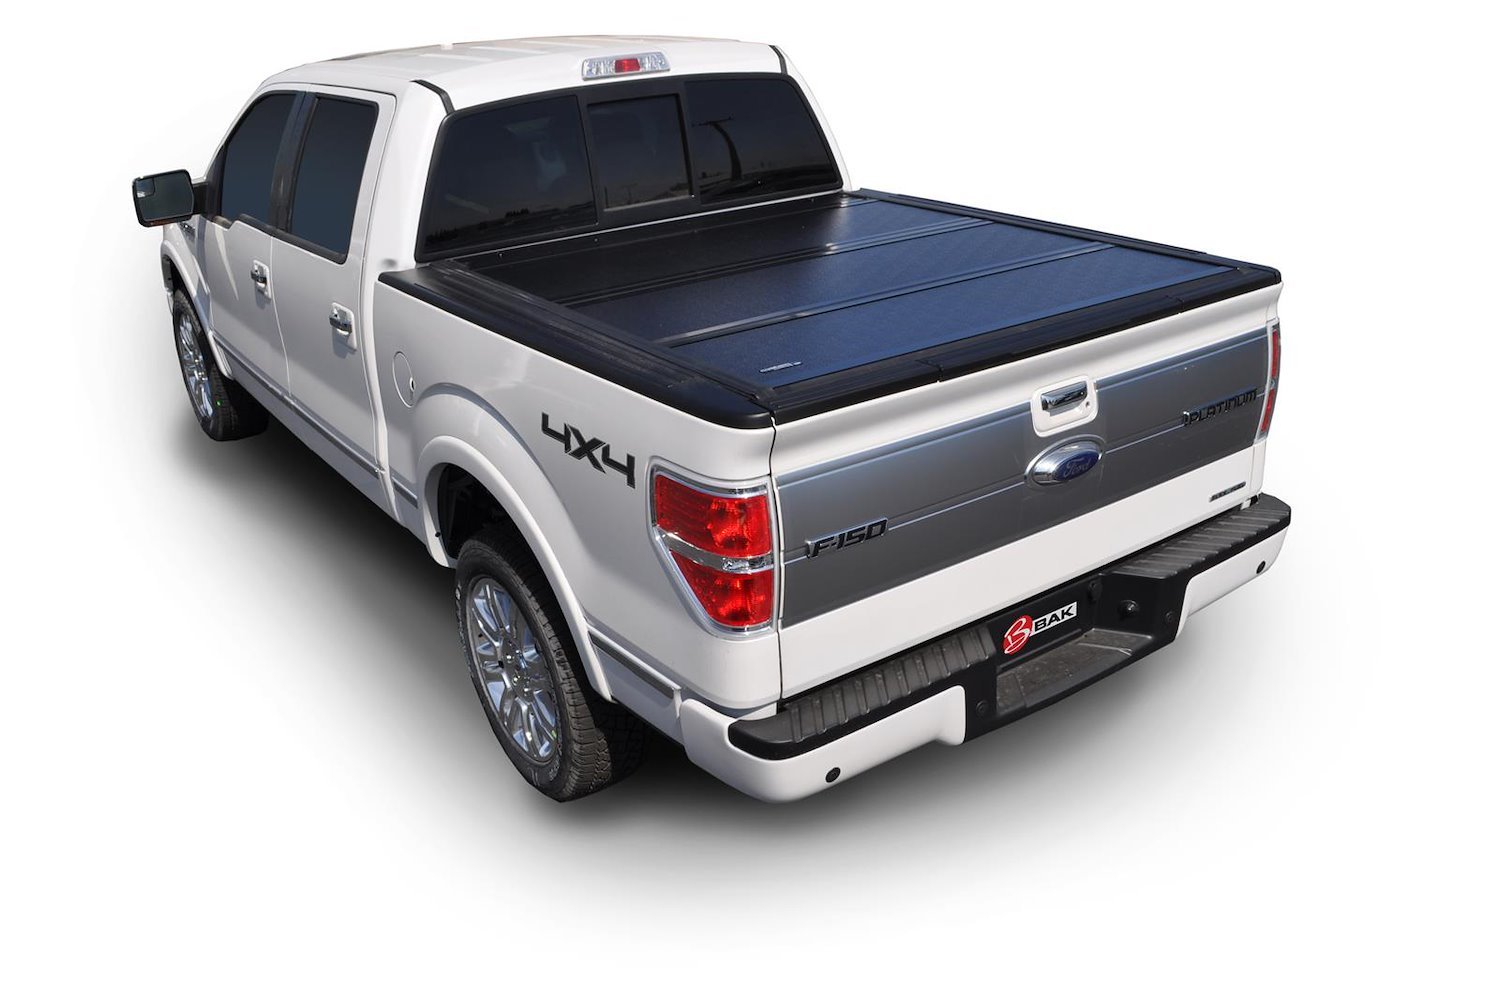 226308 BAKFlip G2 for 04-14 Ford F150 8.1 ft. Bed, Hard Folding Cover Style [Black Finish]